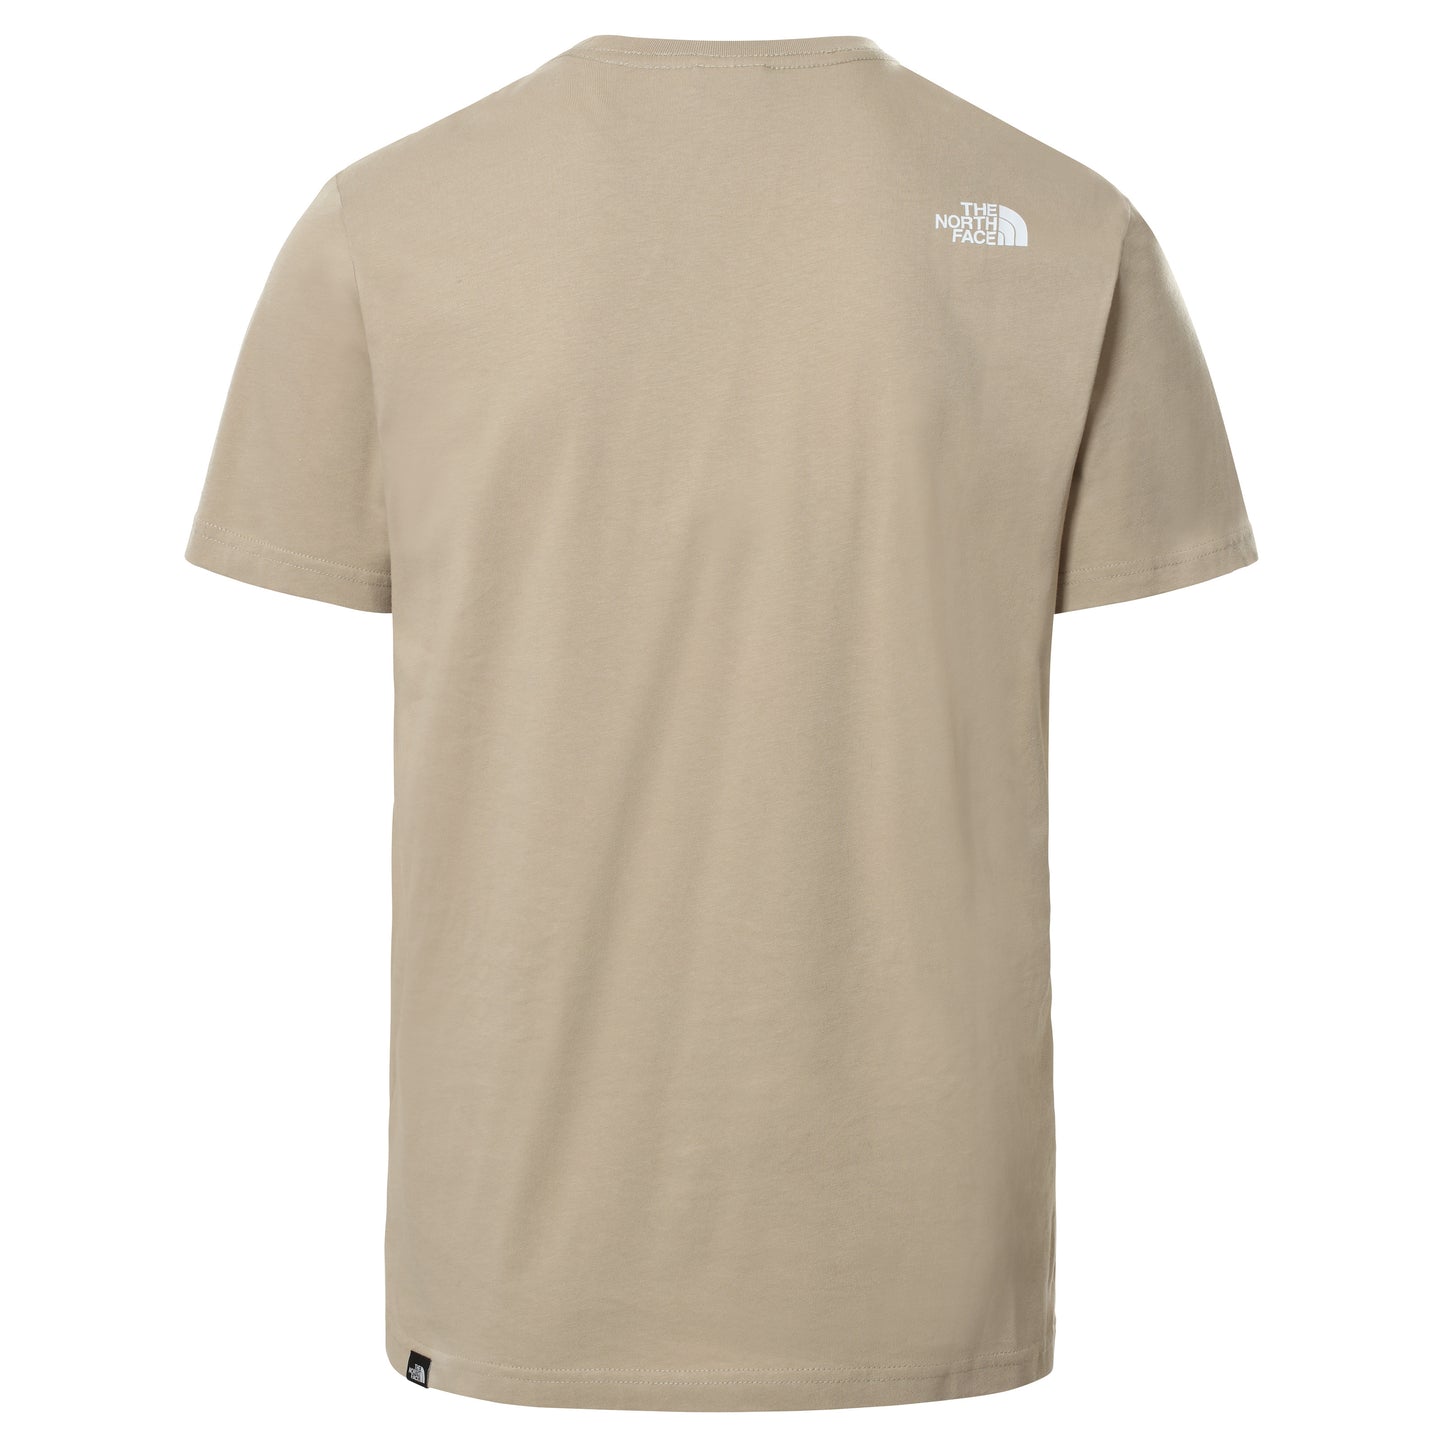 THE NORTH FACE S/S FINE TEE - FLAX/SILVER -GREY freeshipping - FREESTYLE LLORET